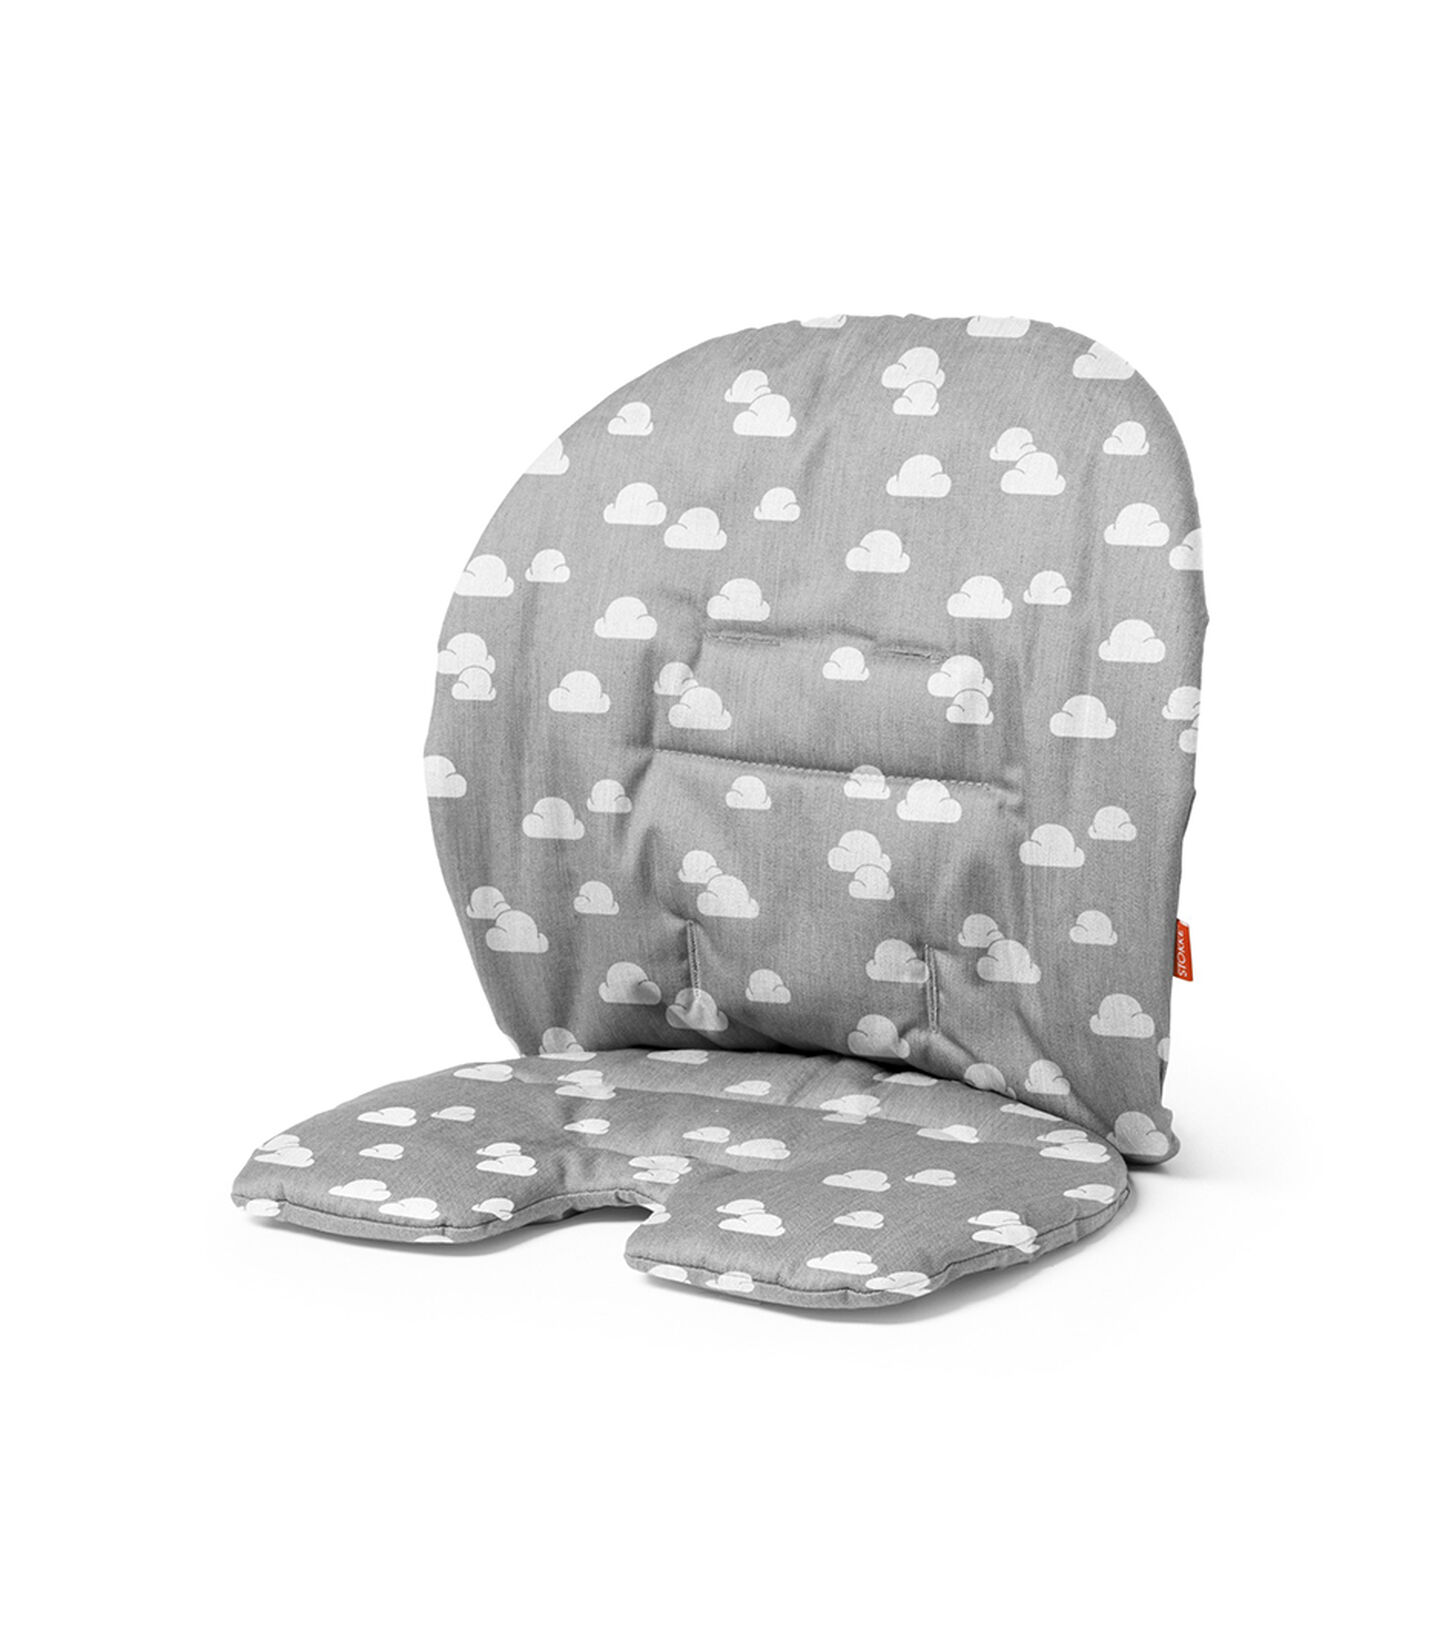 Stokke® Steps™ Baby Set Cushion Grey Clouds, Grey Clouds, mainview view 1